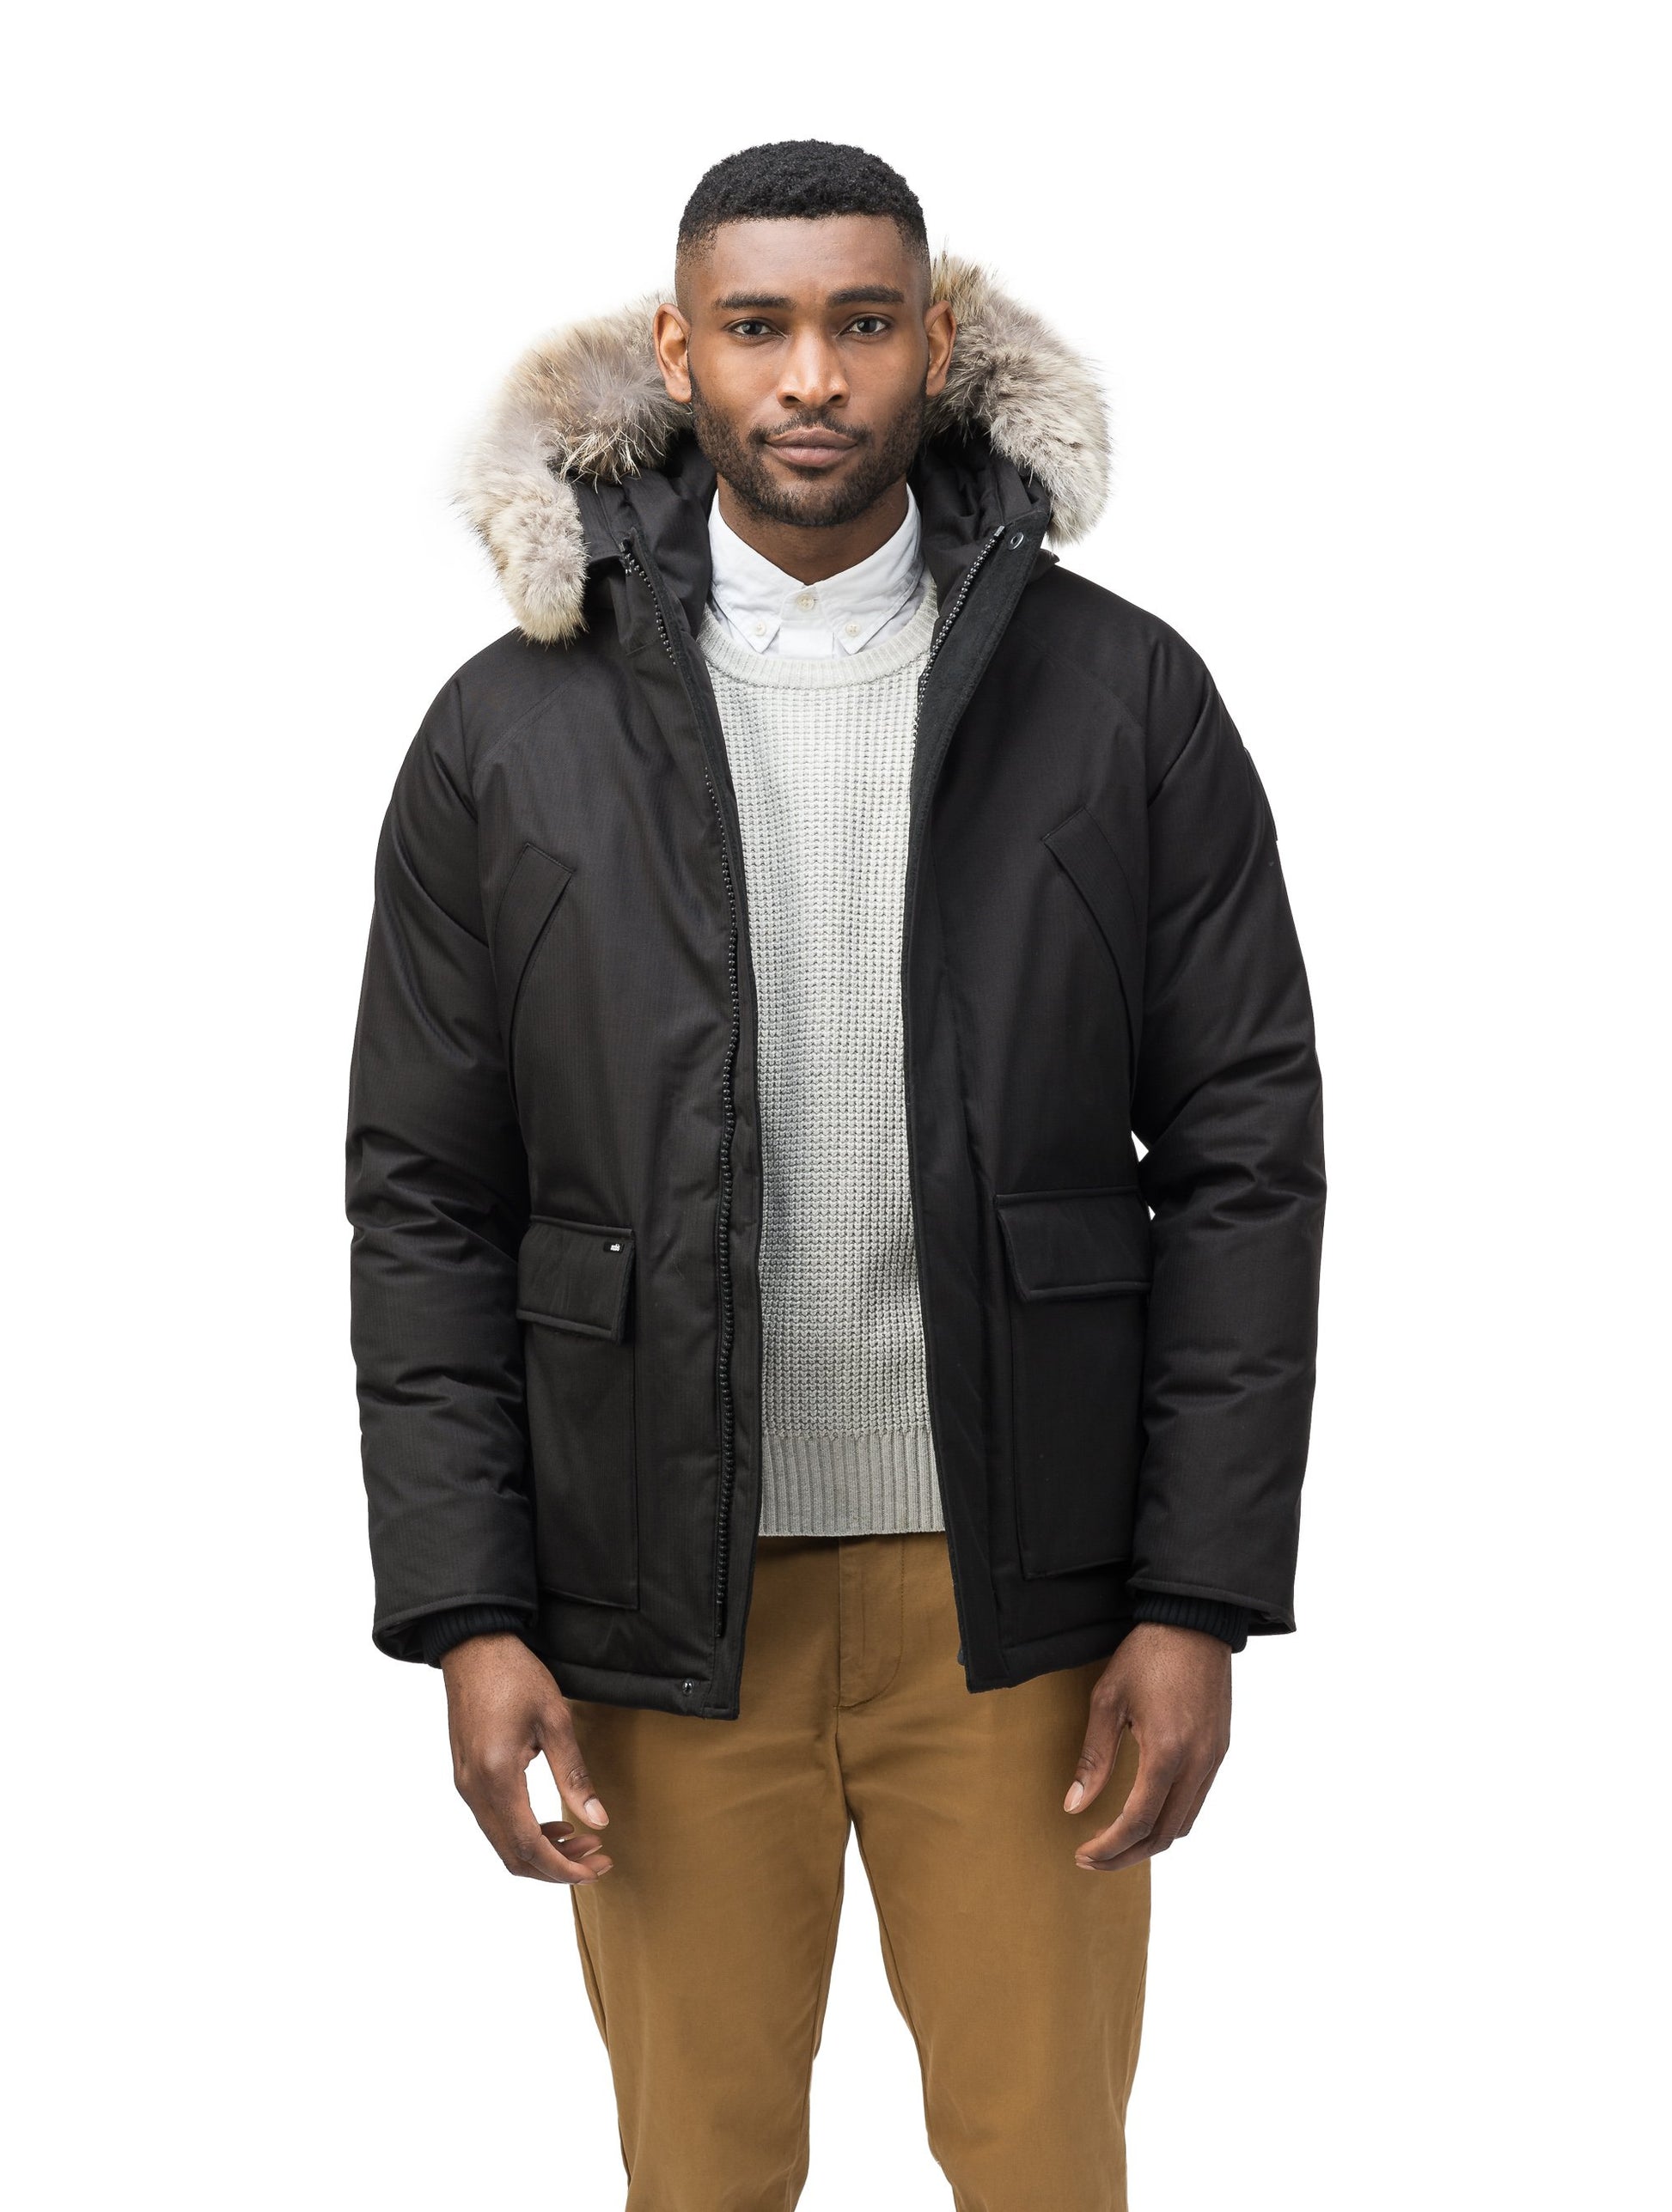 Men's waist length down filled jacket with two front pockets with magnetic closure and a removable fur trim on the hood in CH Black